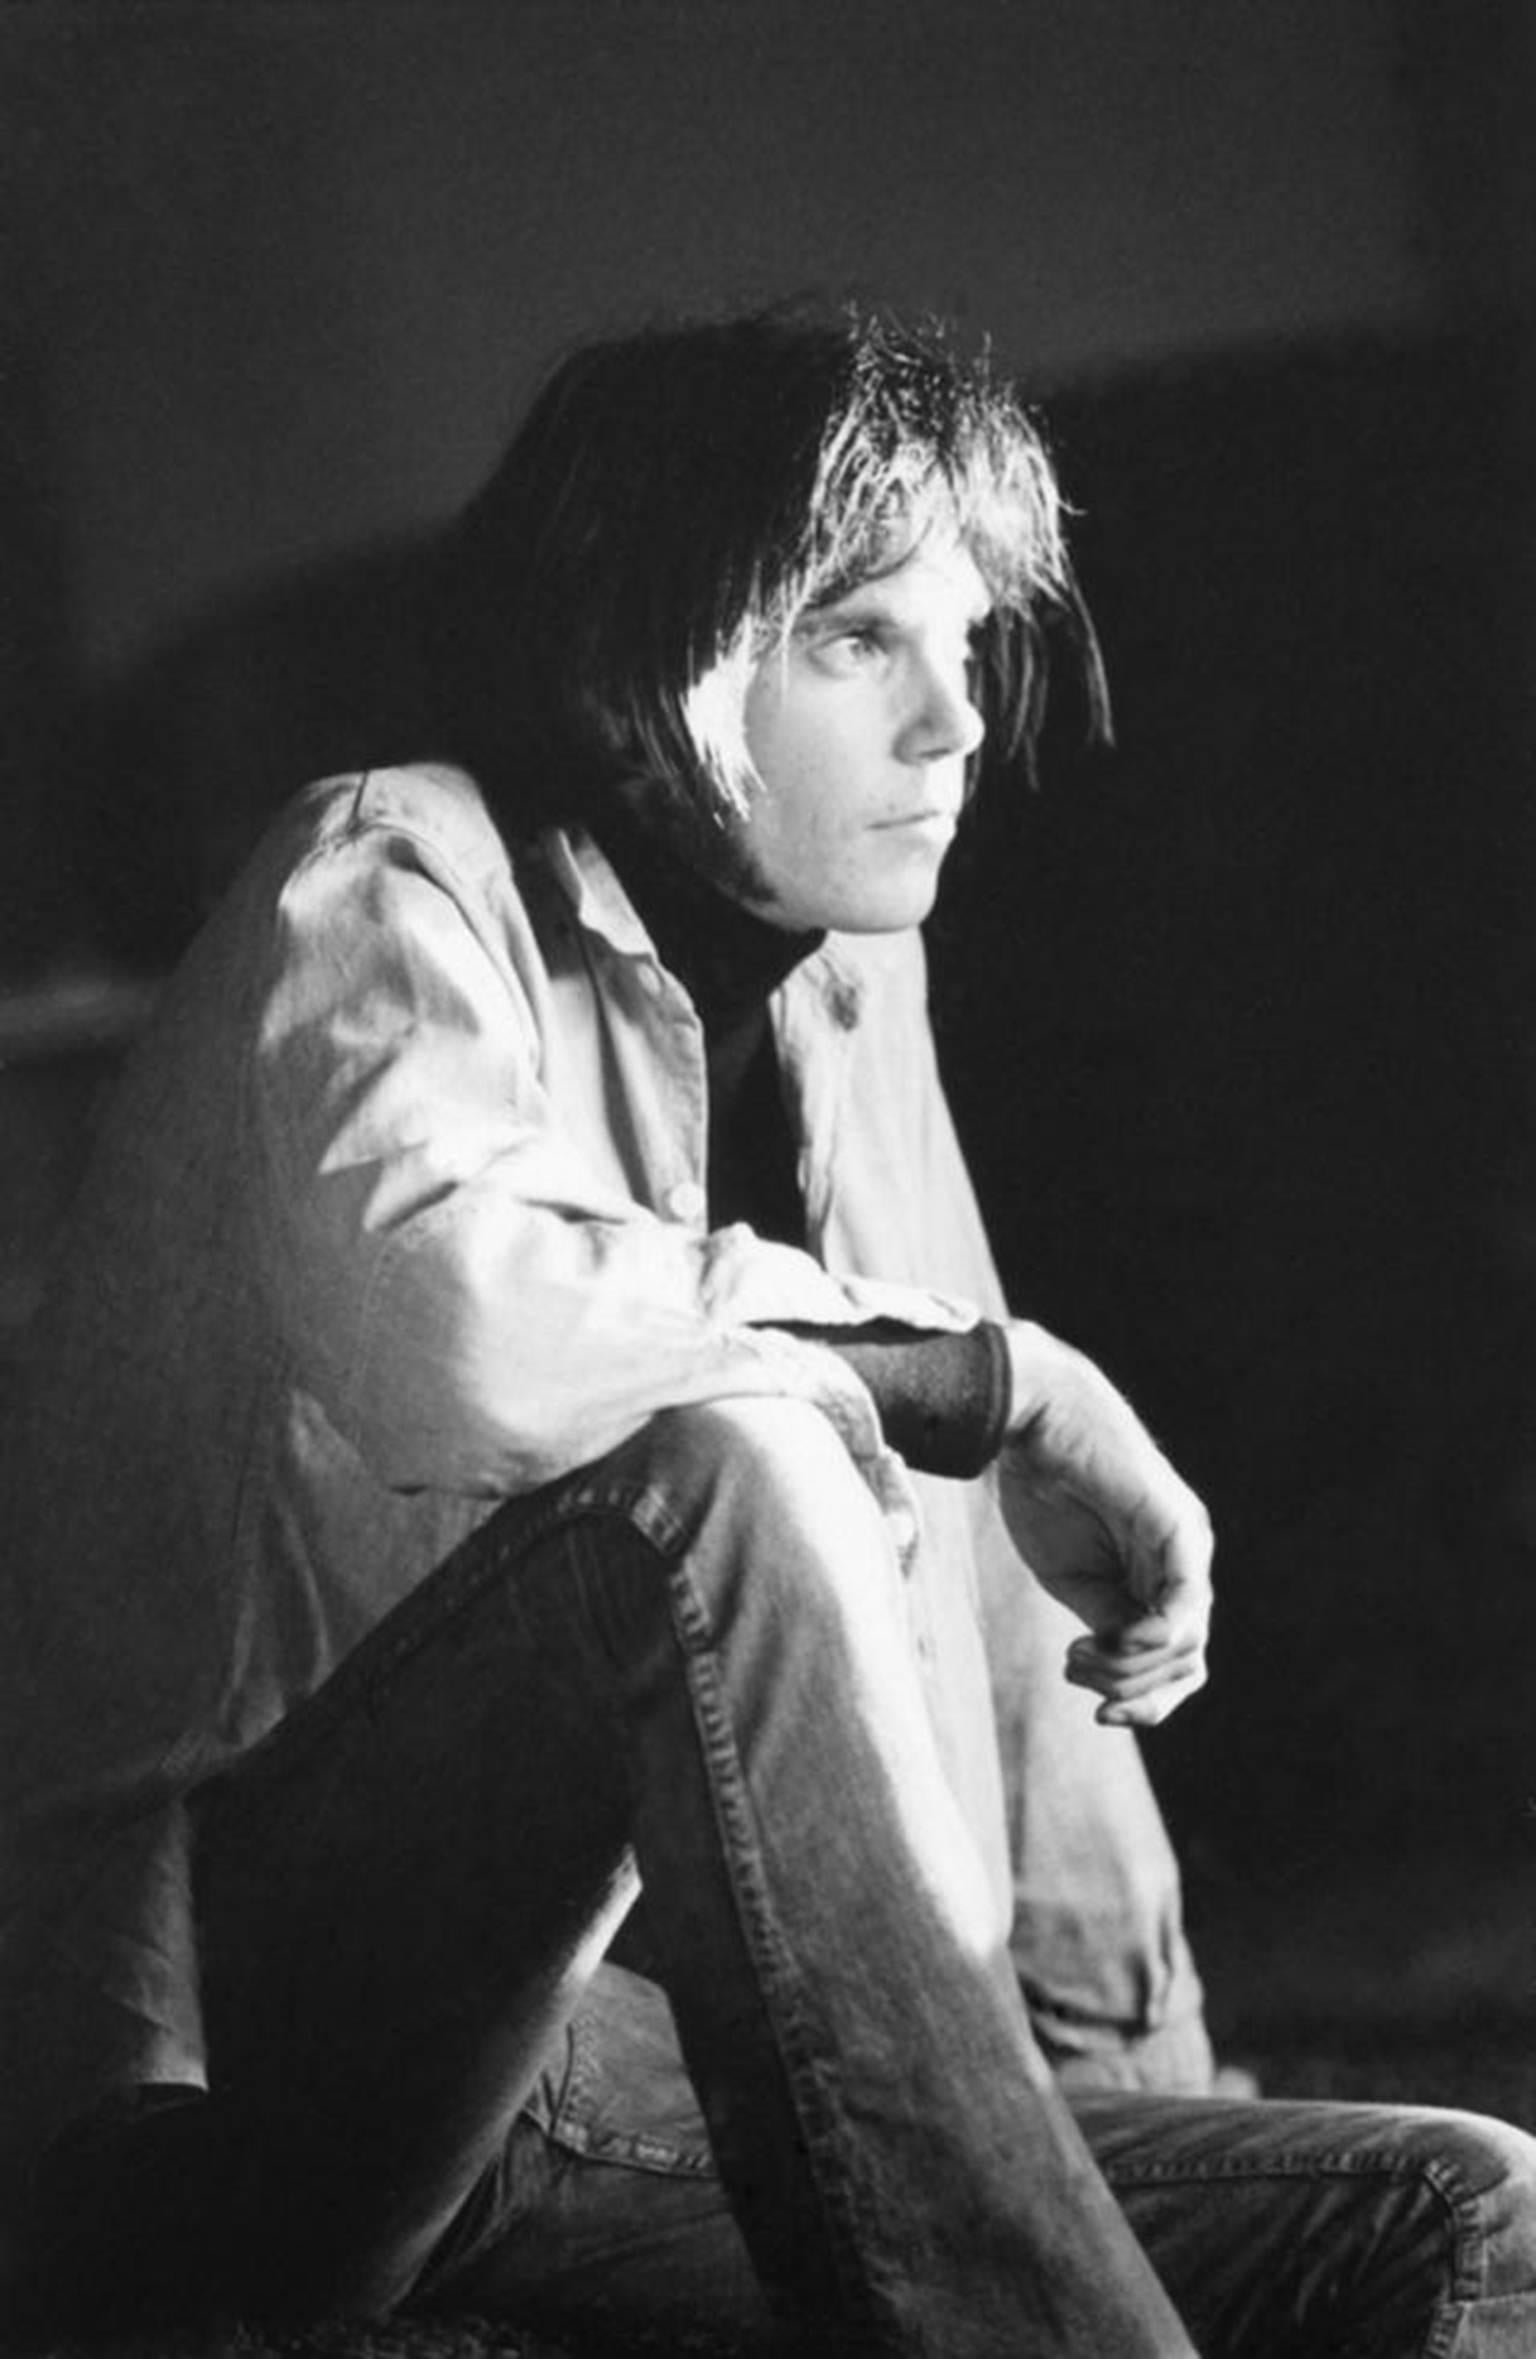 Graham Nash Black and White Photograph - Neil Young